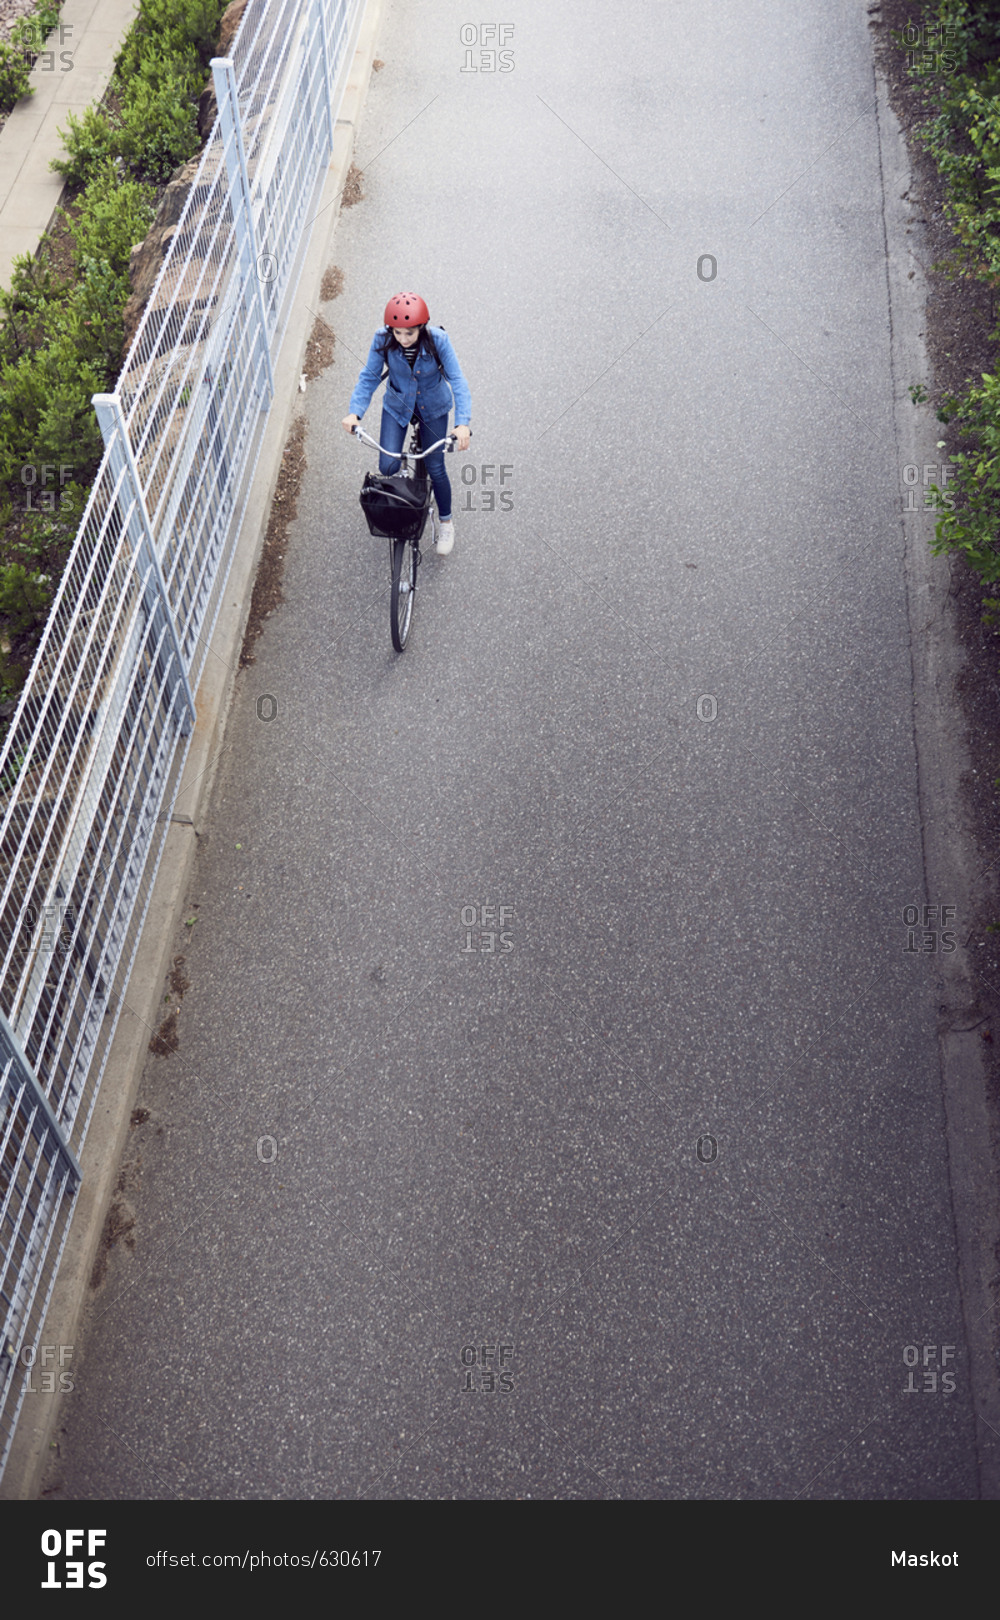 High angle view of woman cycling on road by fence